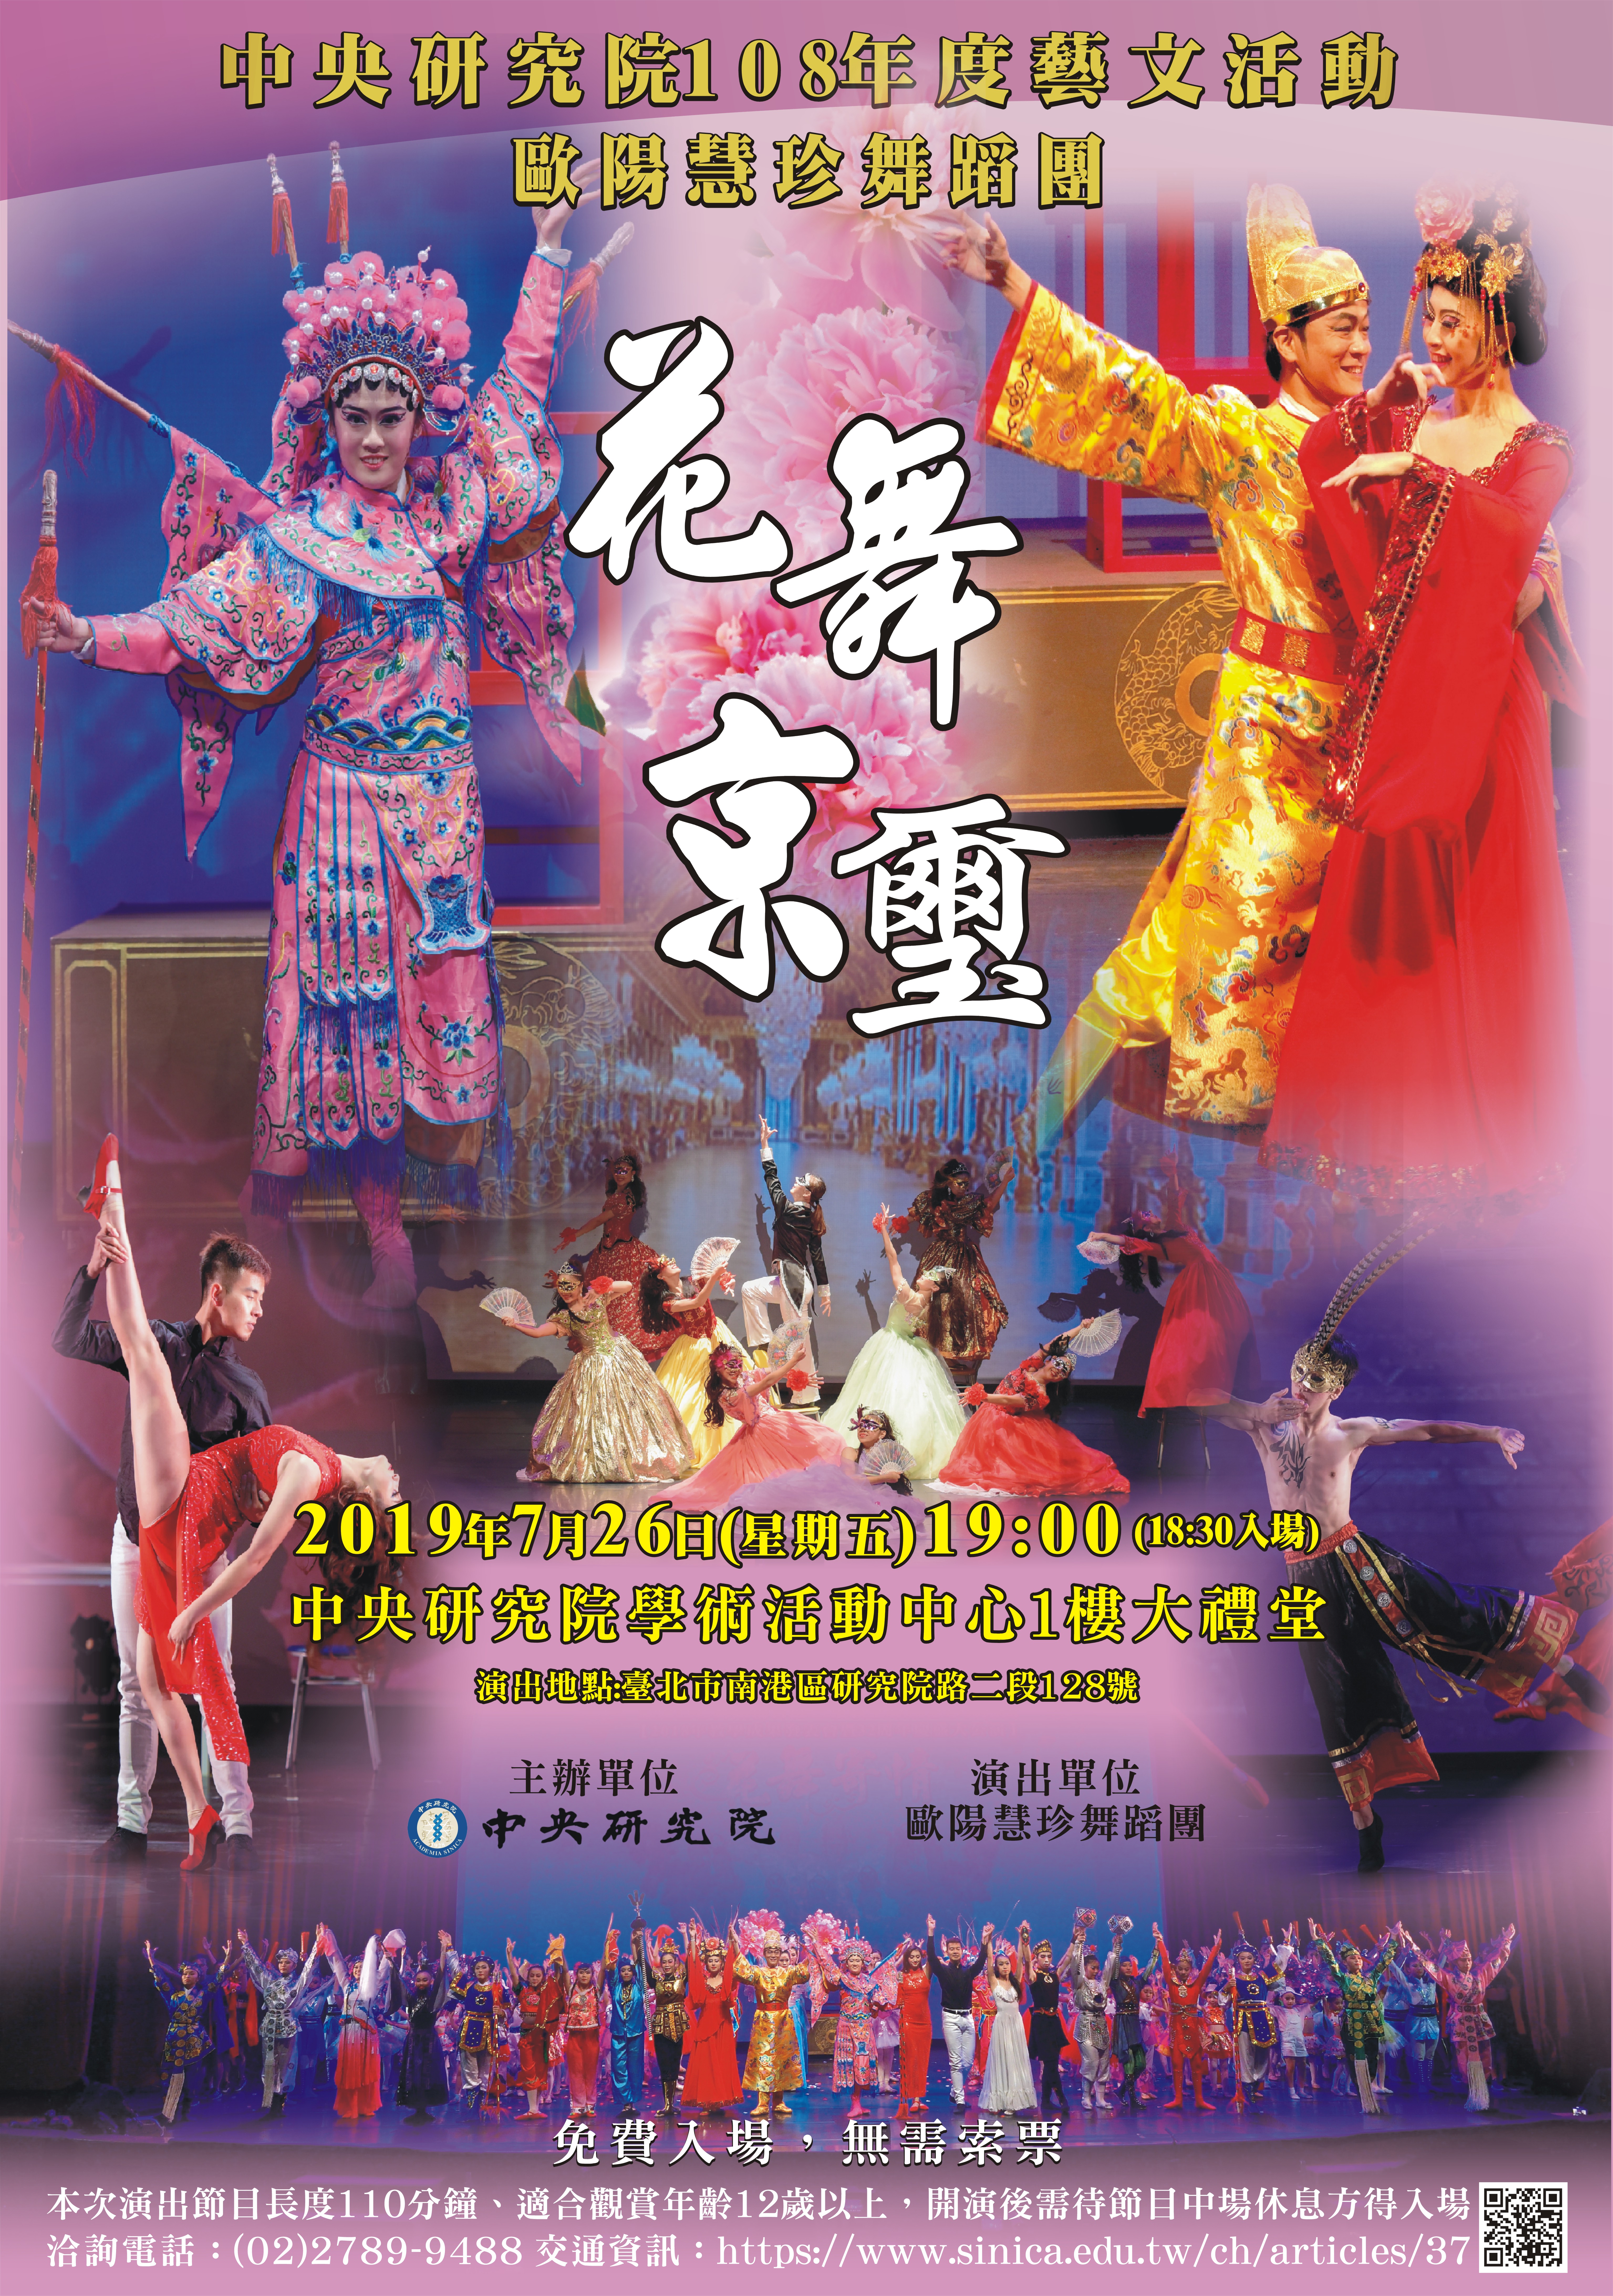 2019 Artistic Event: “Flower Dance &#038; the Essence of Chinese Opera” by the Ou-Yang Hui-Chen Dance Company